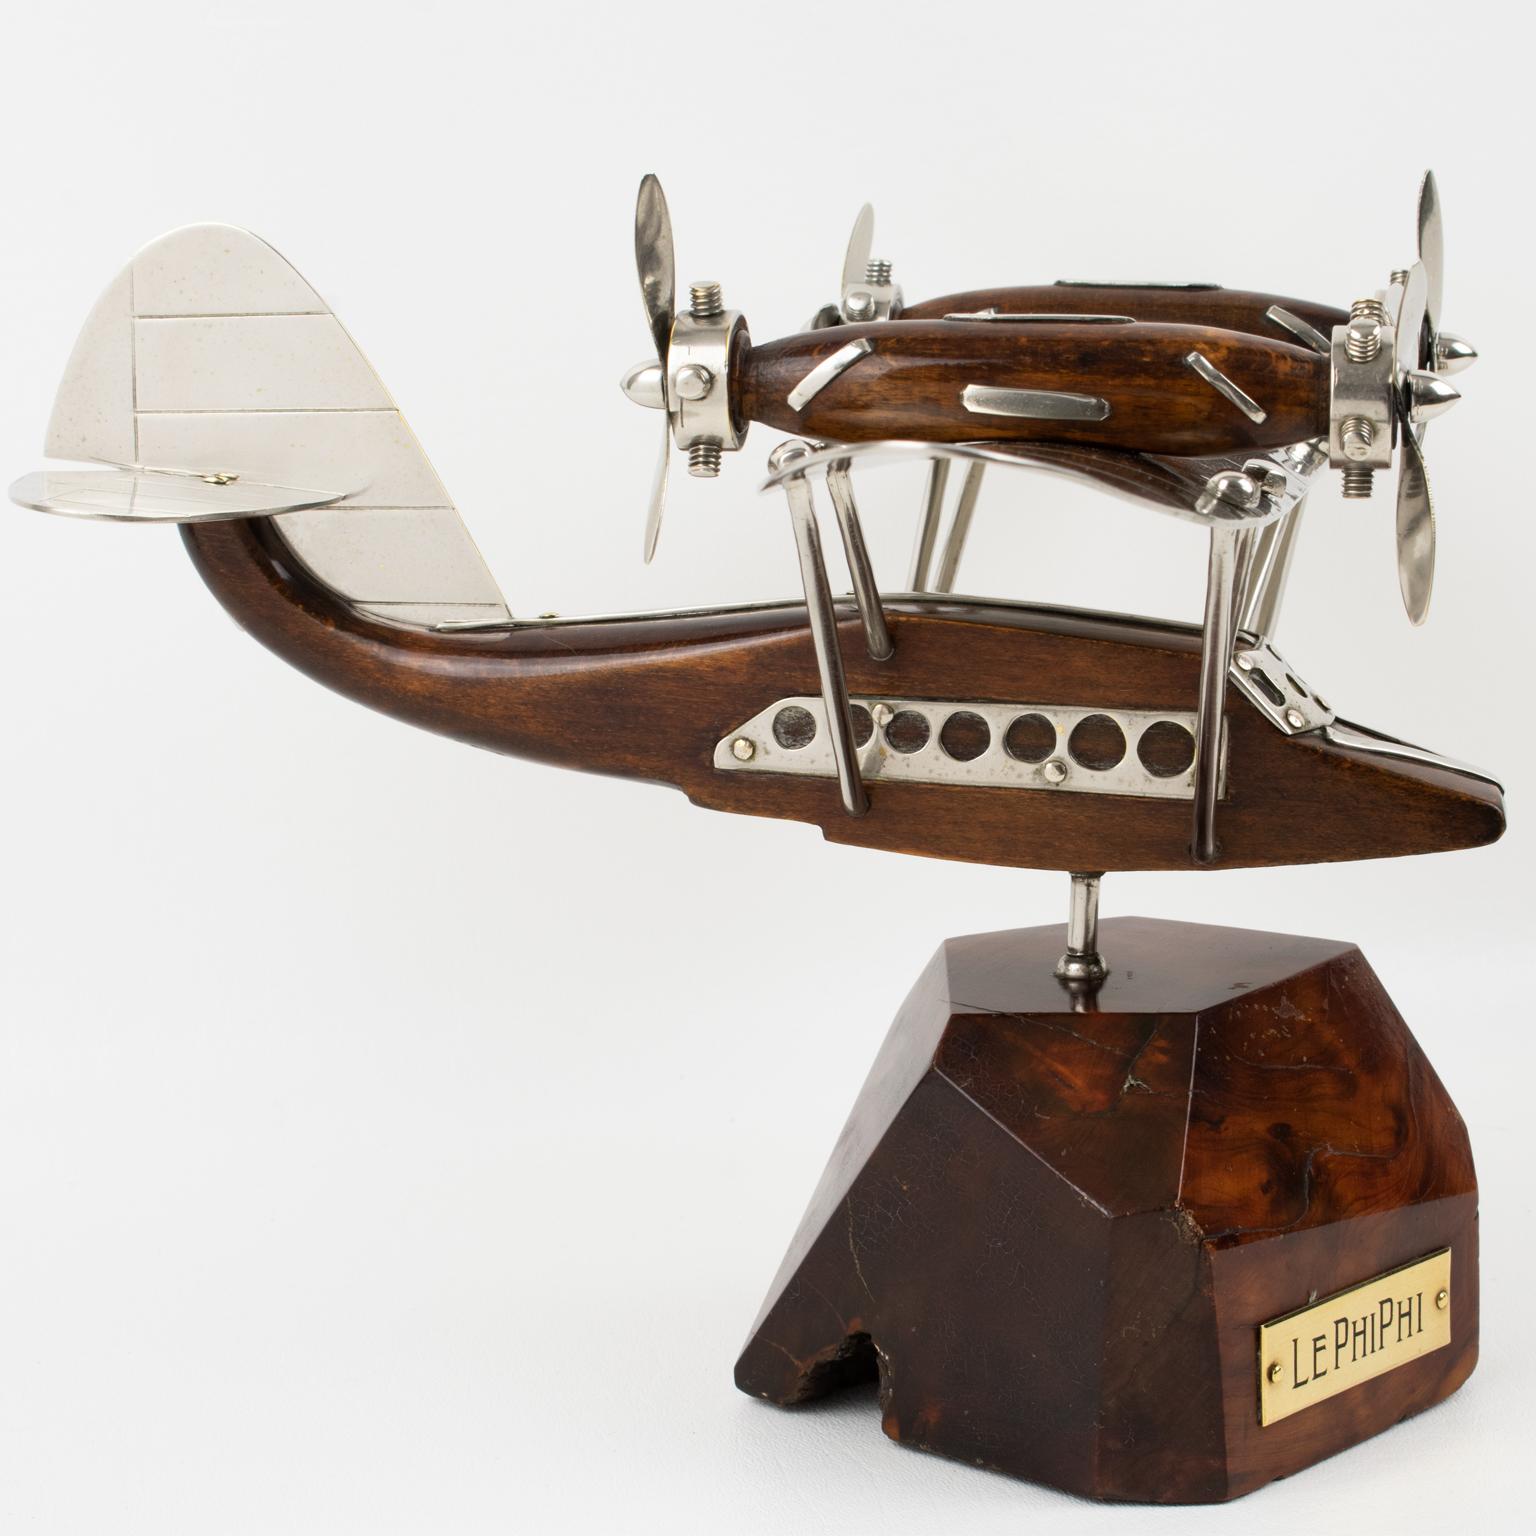 French Art Deco Wood and Chrome Airplane SeaPlane Aviation Model, 1940s For Sale 5